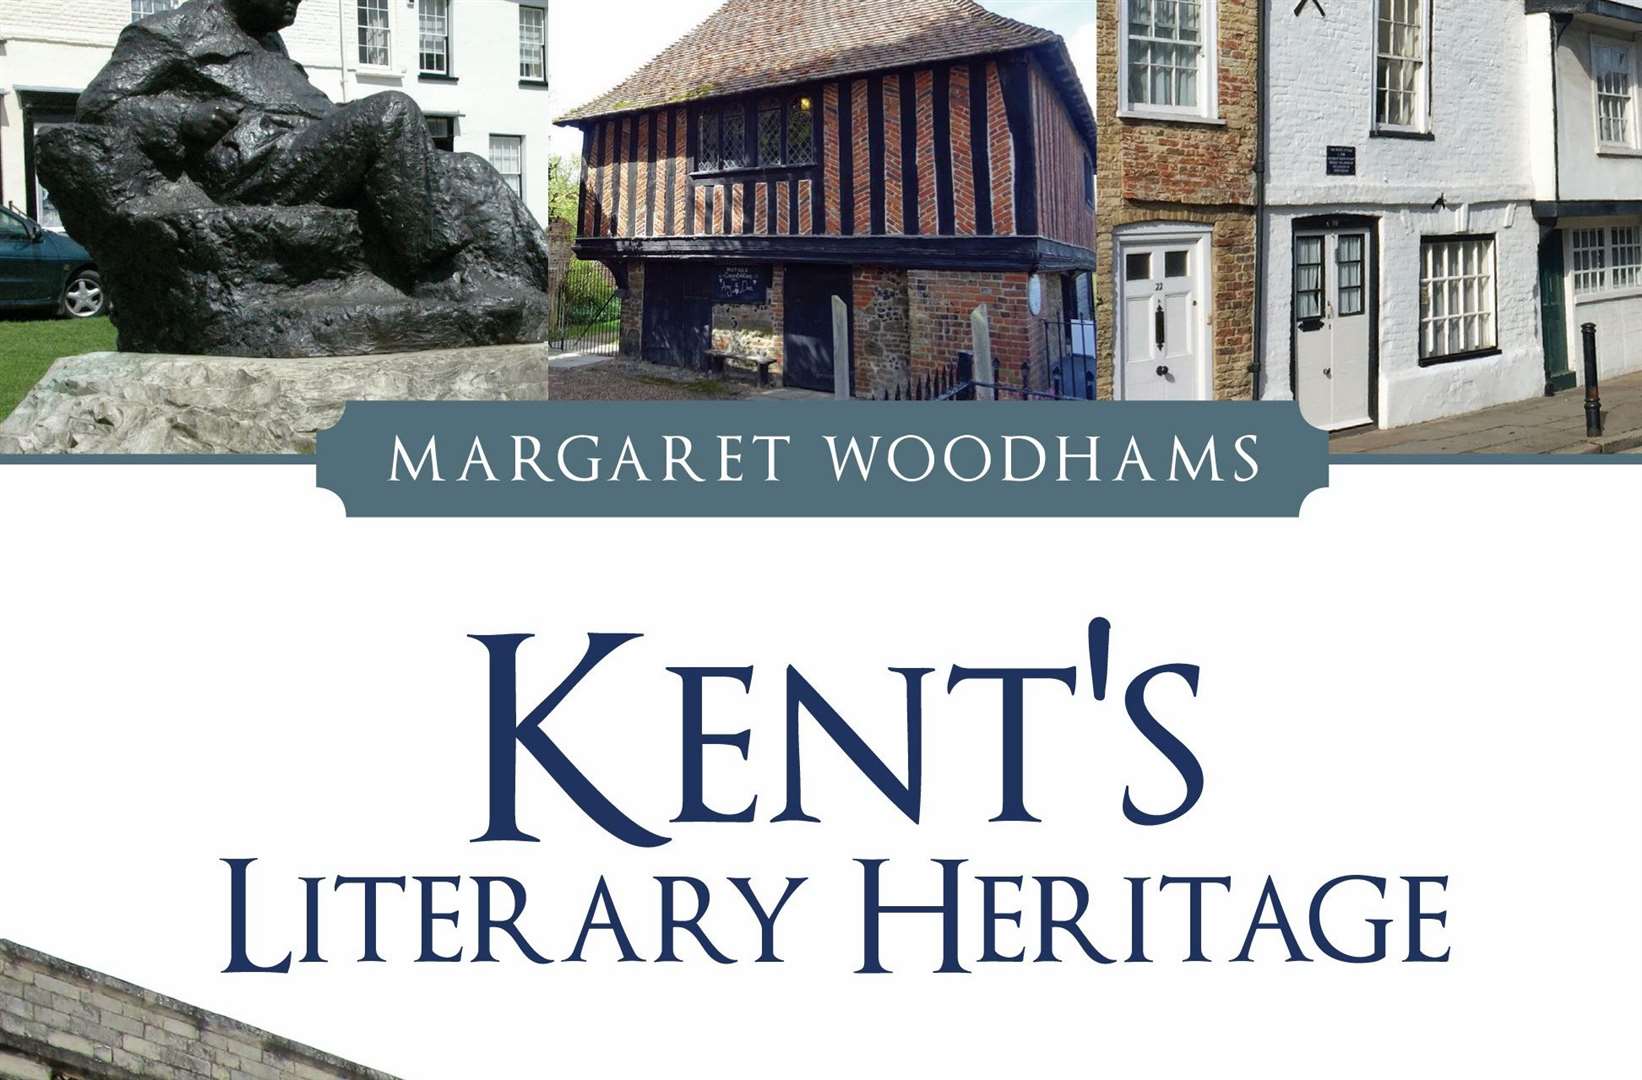 Margaret Woodhams' new book is published this month